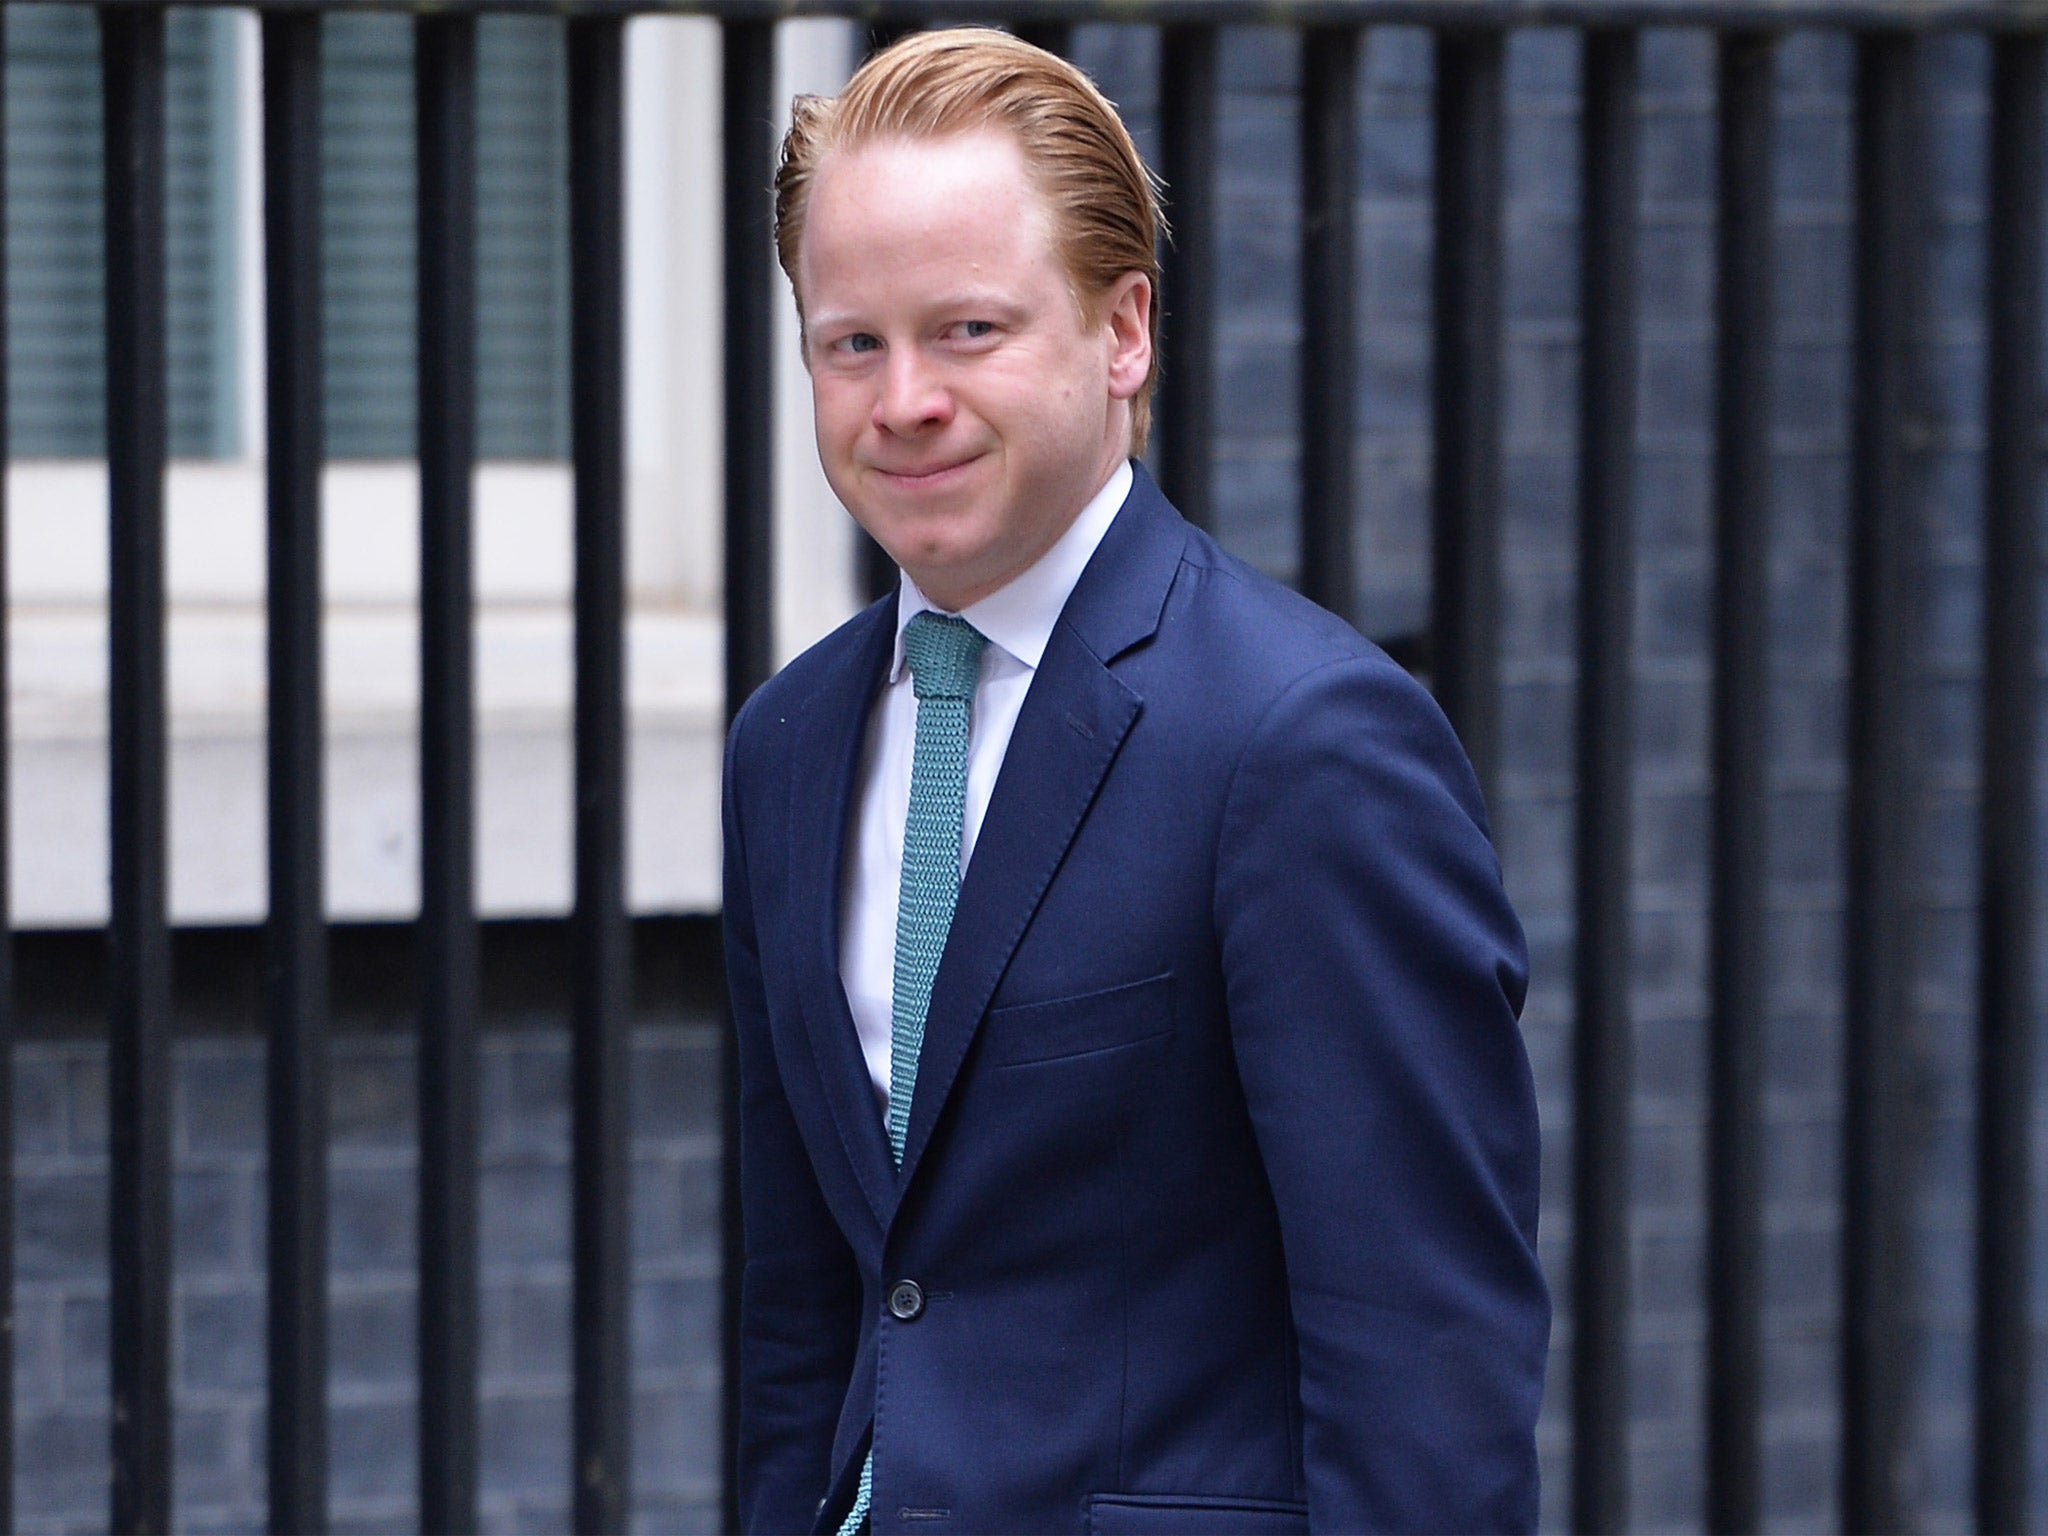 Ben Gummer, Parliamentary Under Secretary of State for the Department of Health